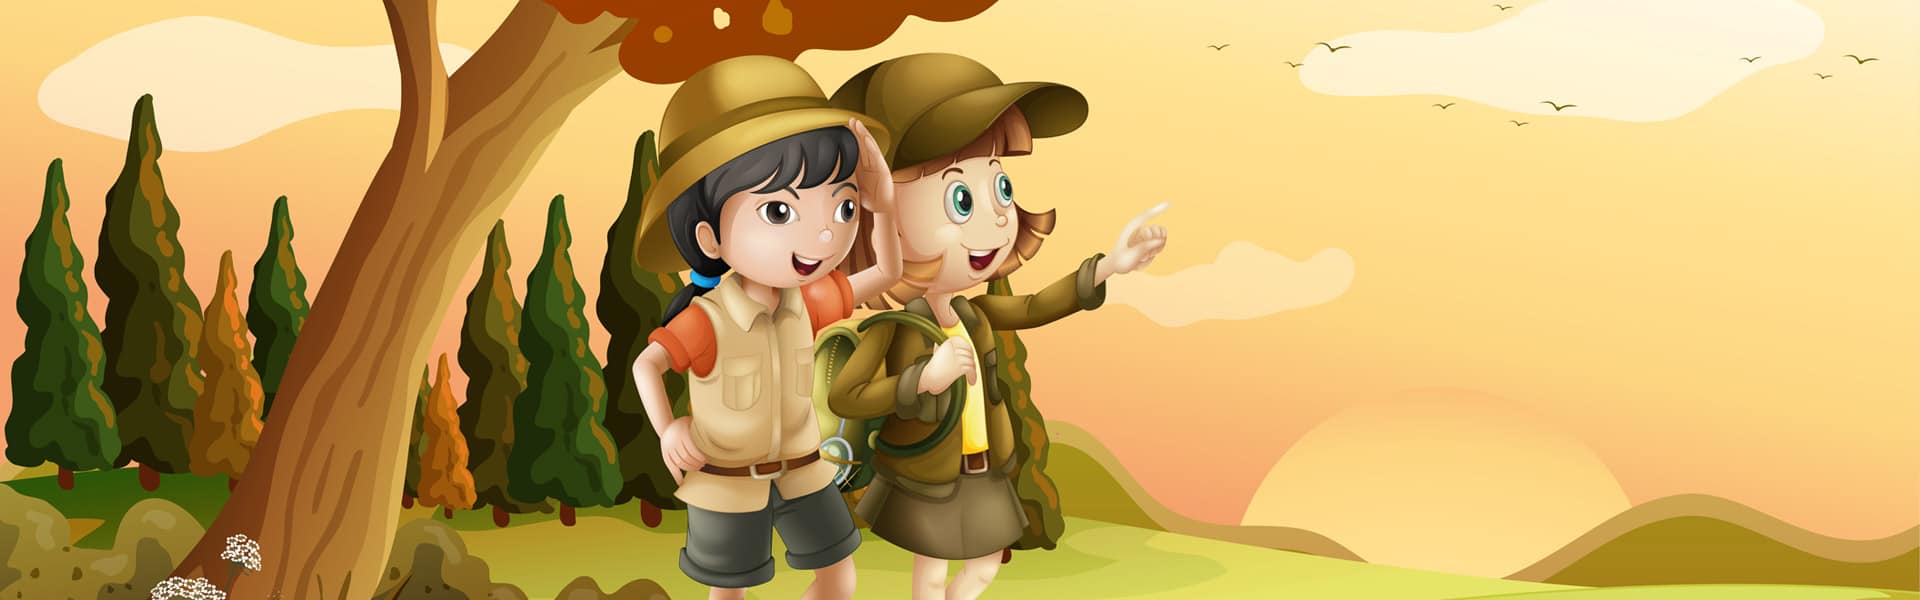 A graphic drawing of two children dressed as explorers